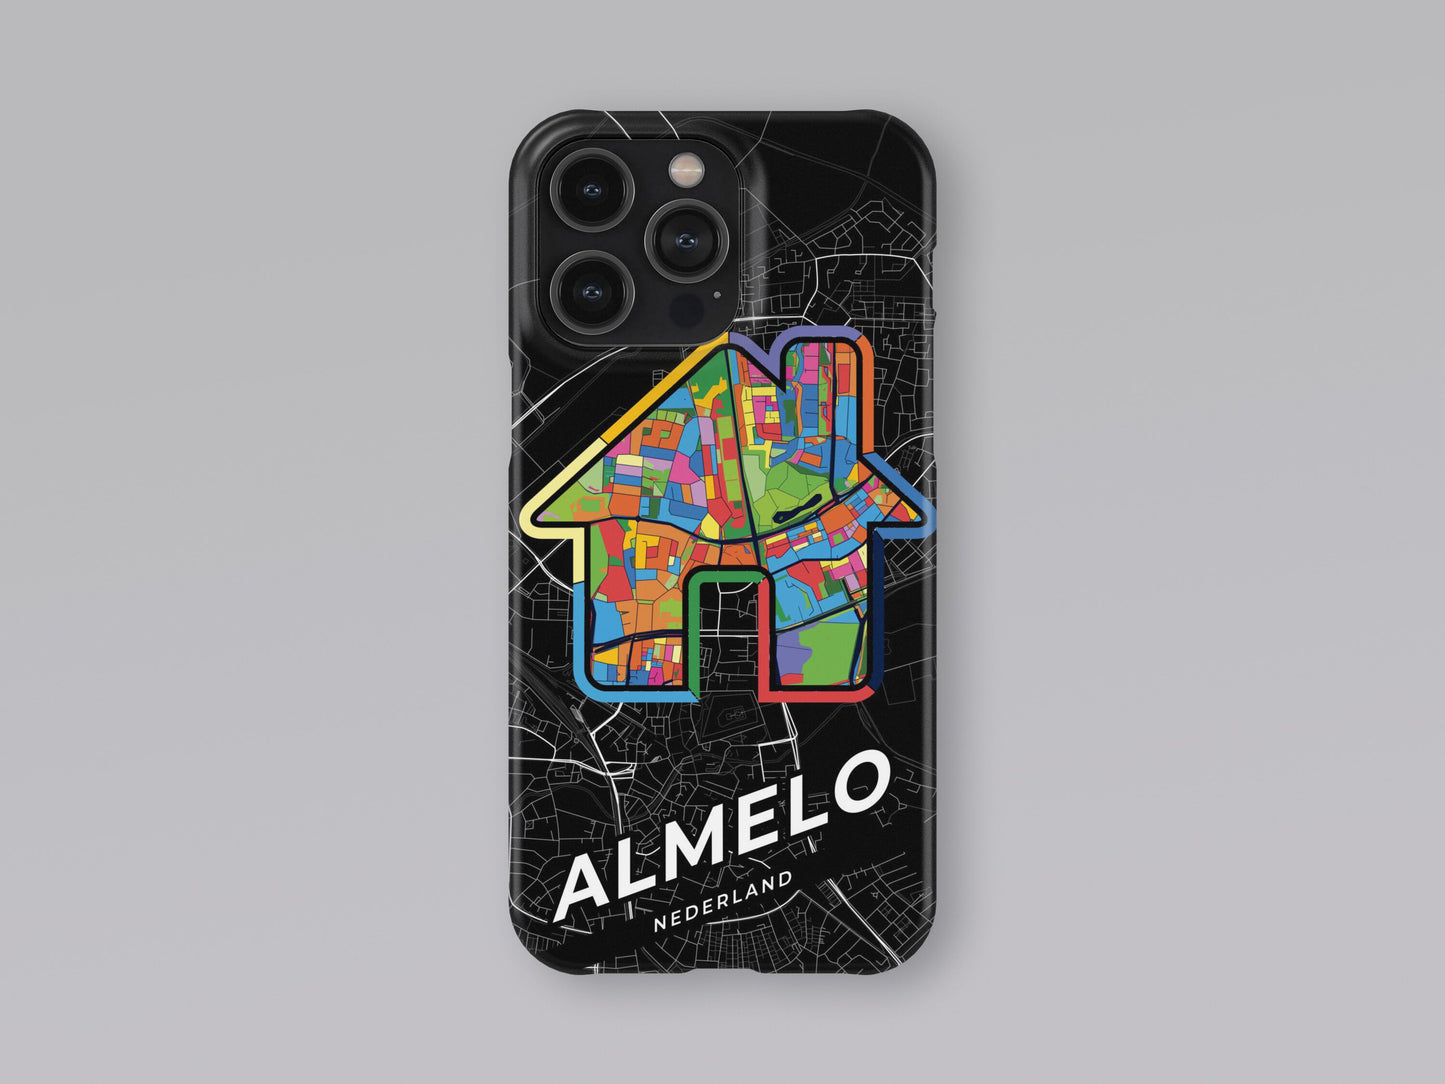 Almelo Netherlands slim phone case with colorful icon. Birthday, wedding or housewarming gift. Couple match cases. 3